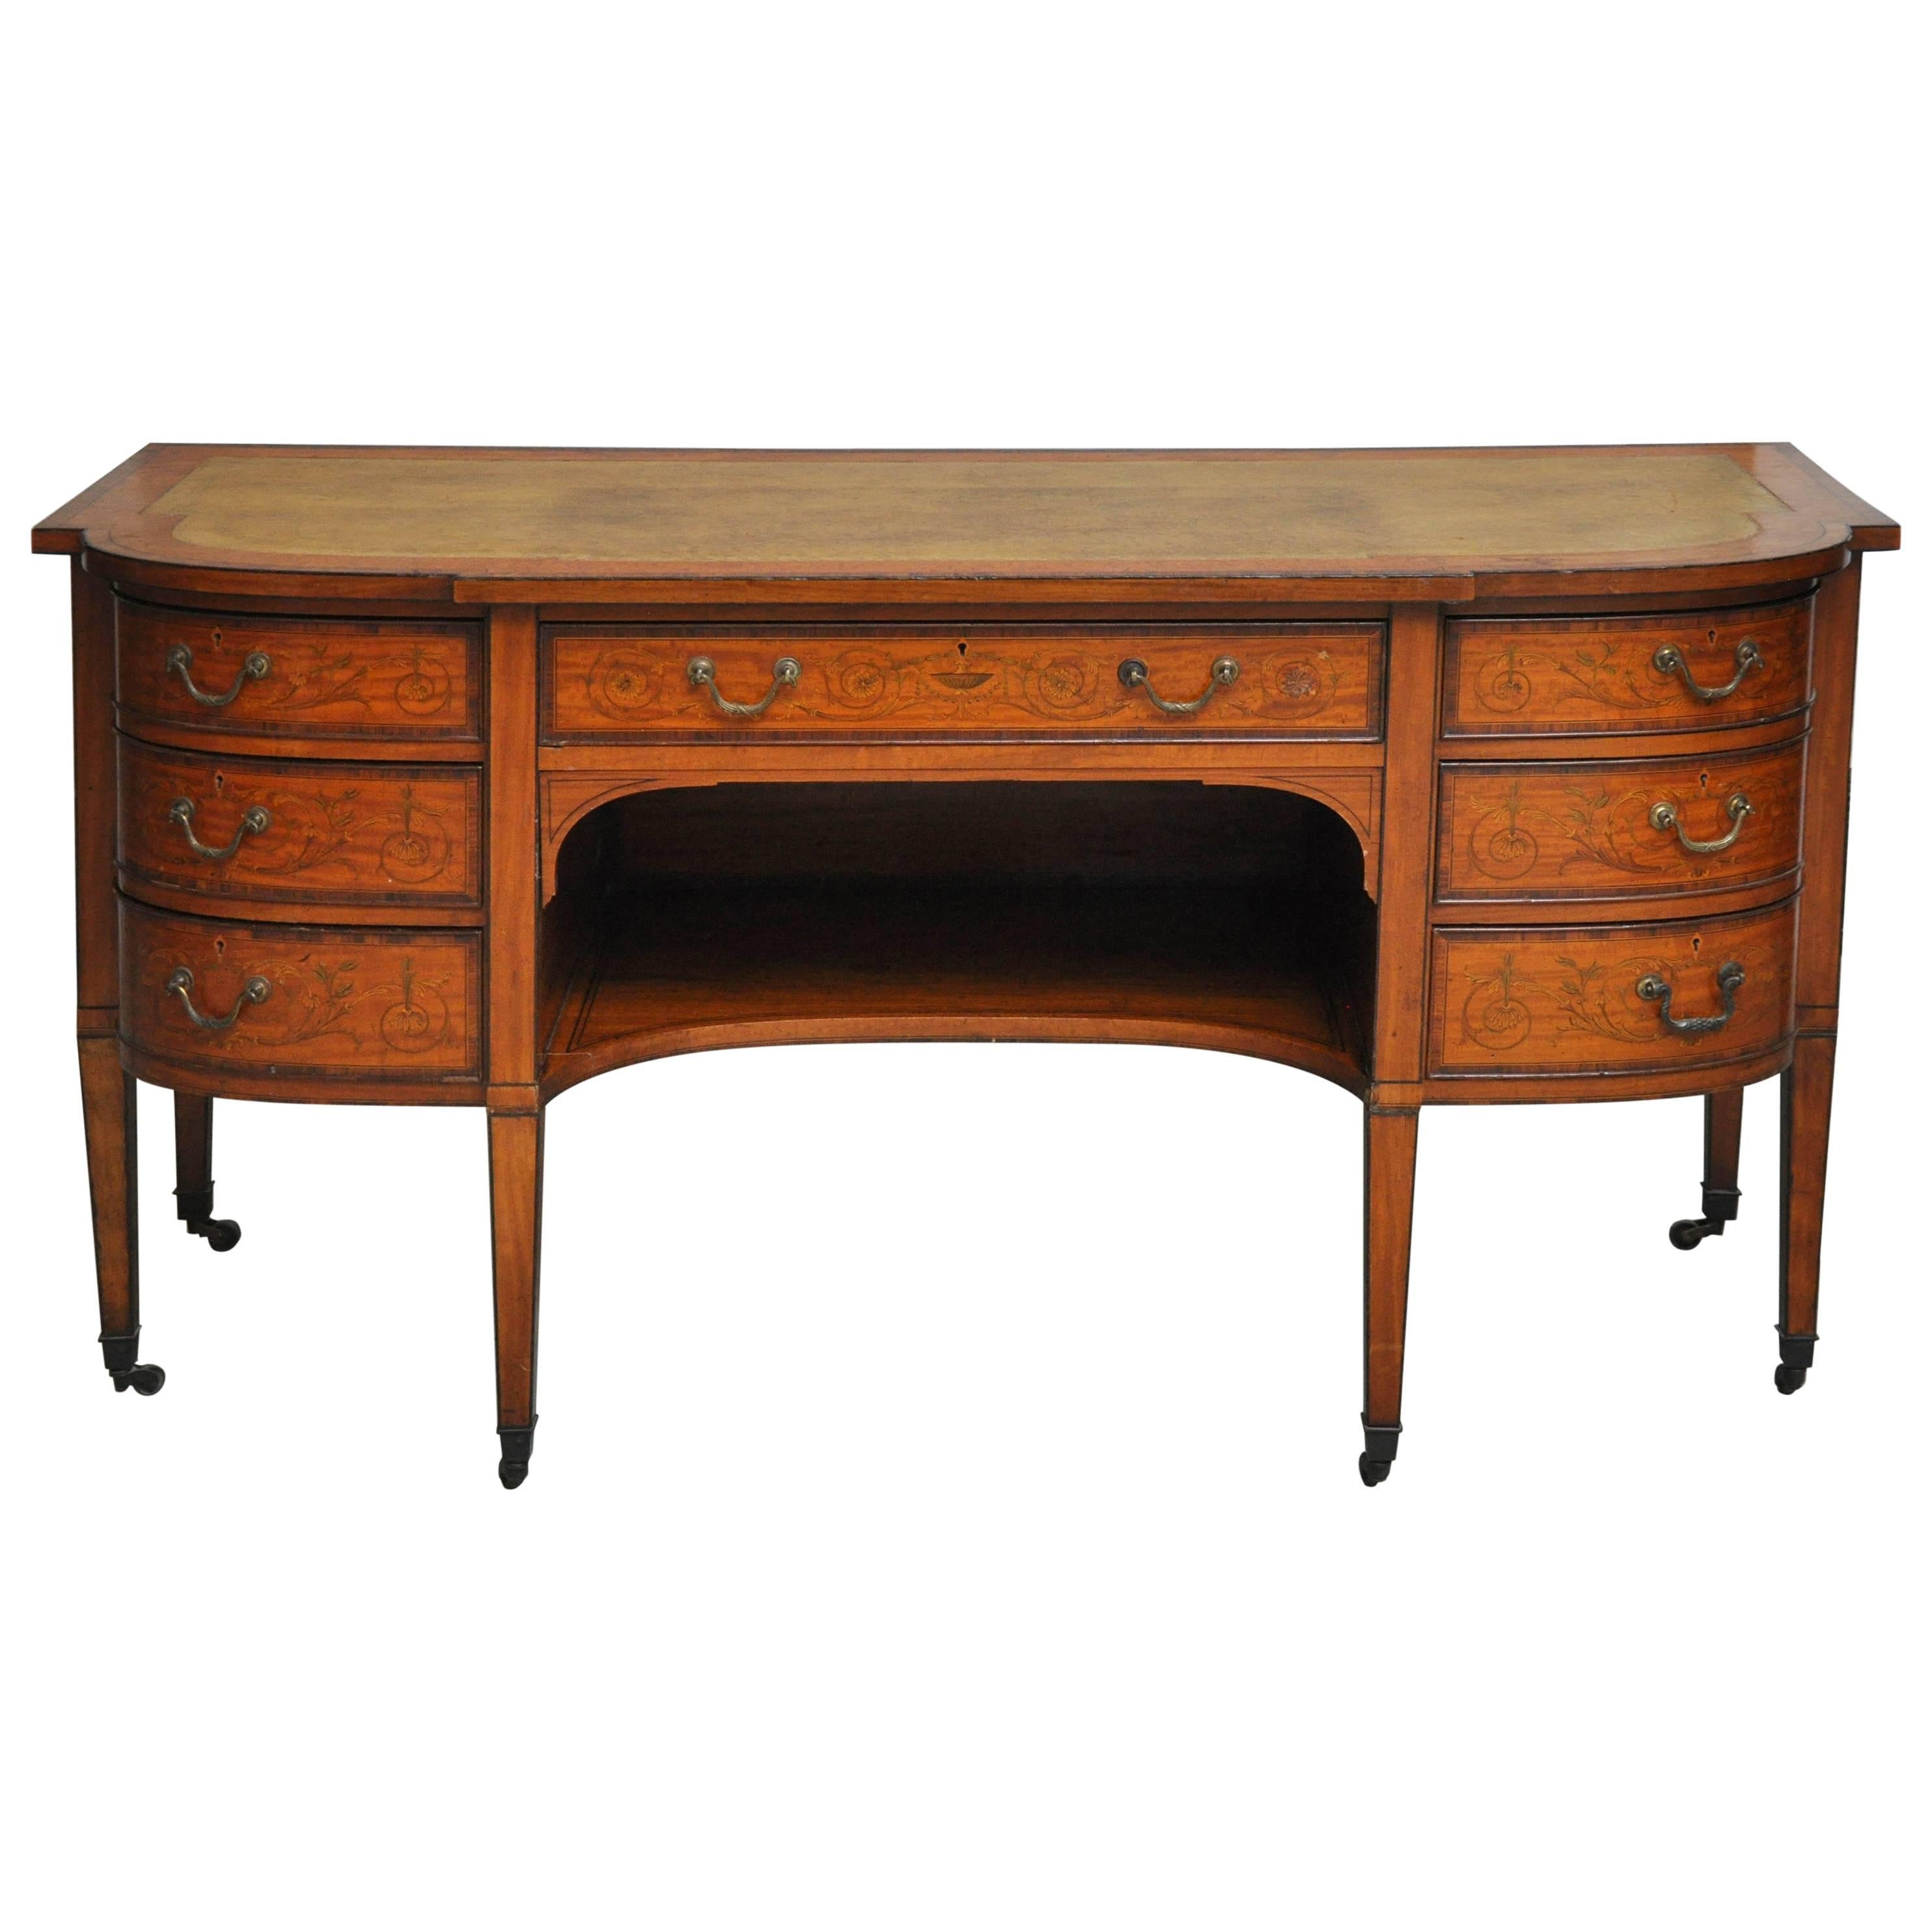 Edwardian Period Sheraton Revival Writing Table by Maple & Co. of London, 1905 For Sale